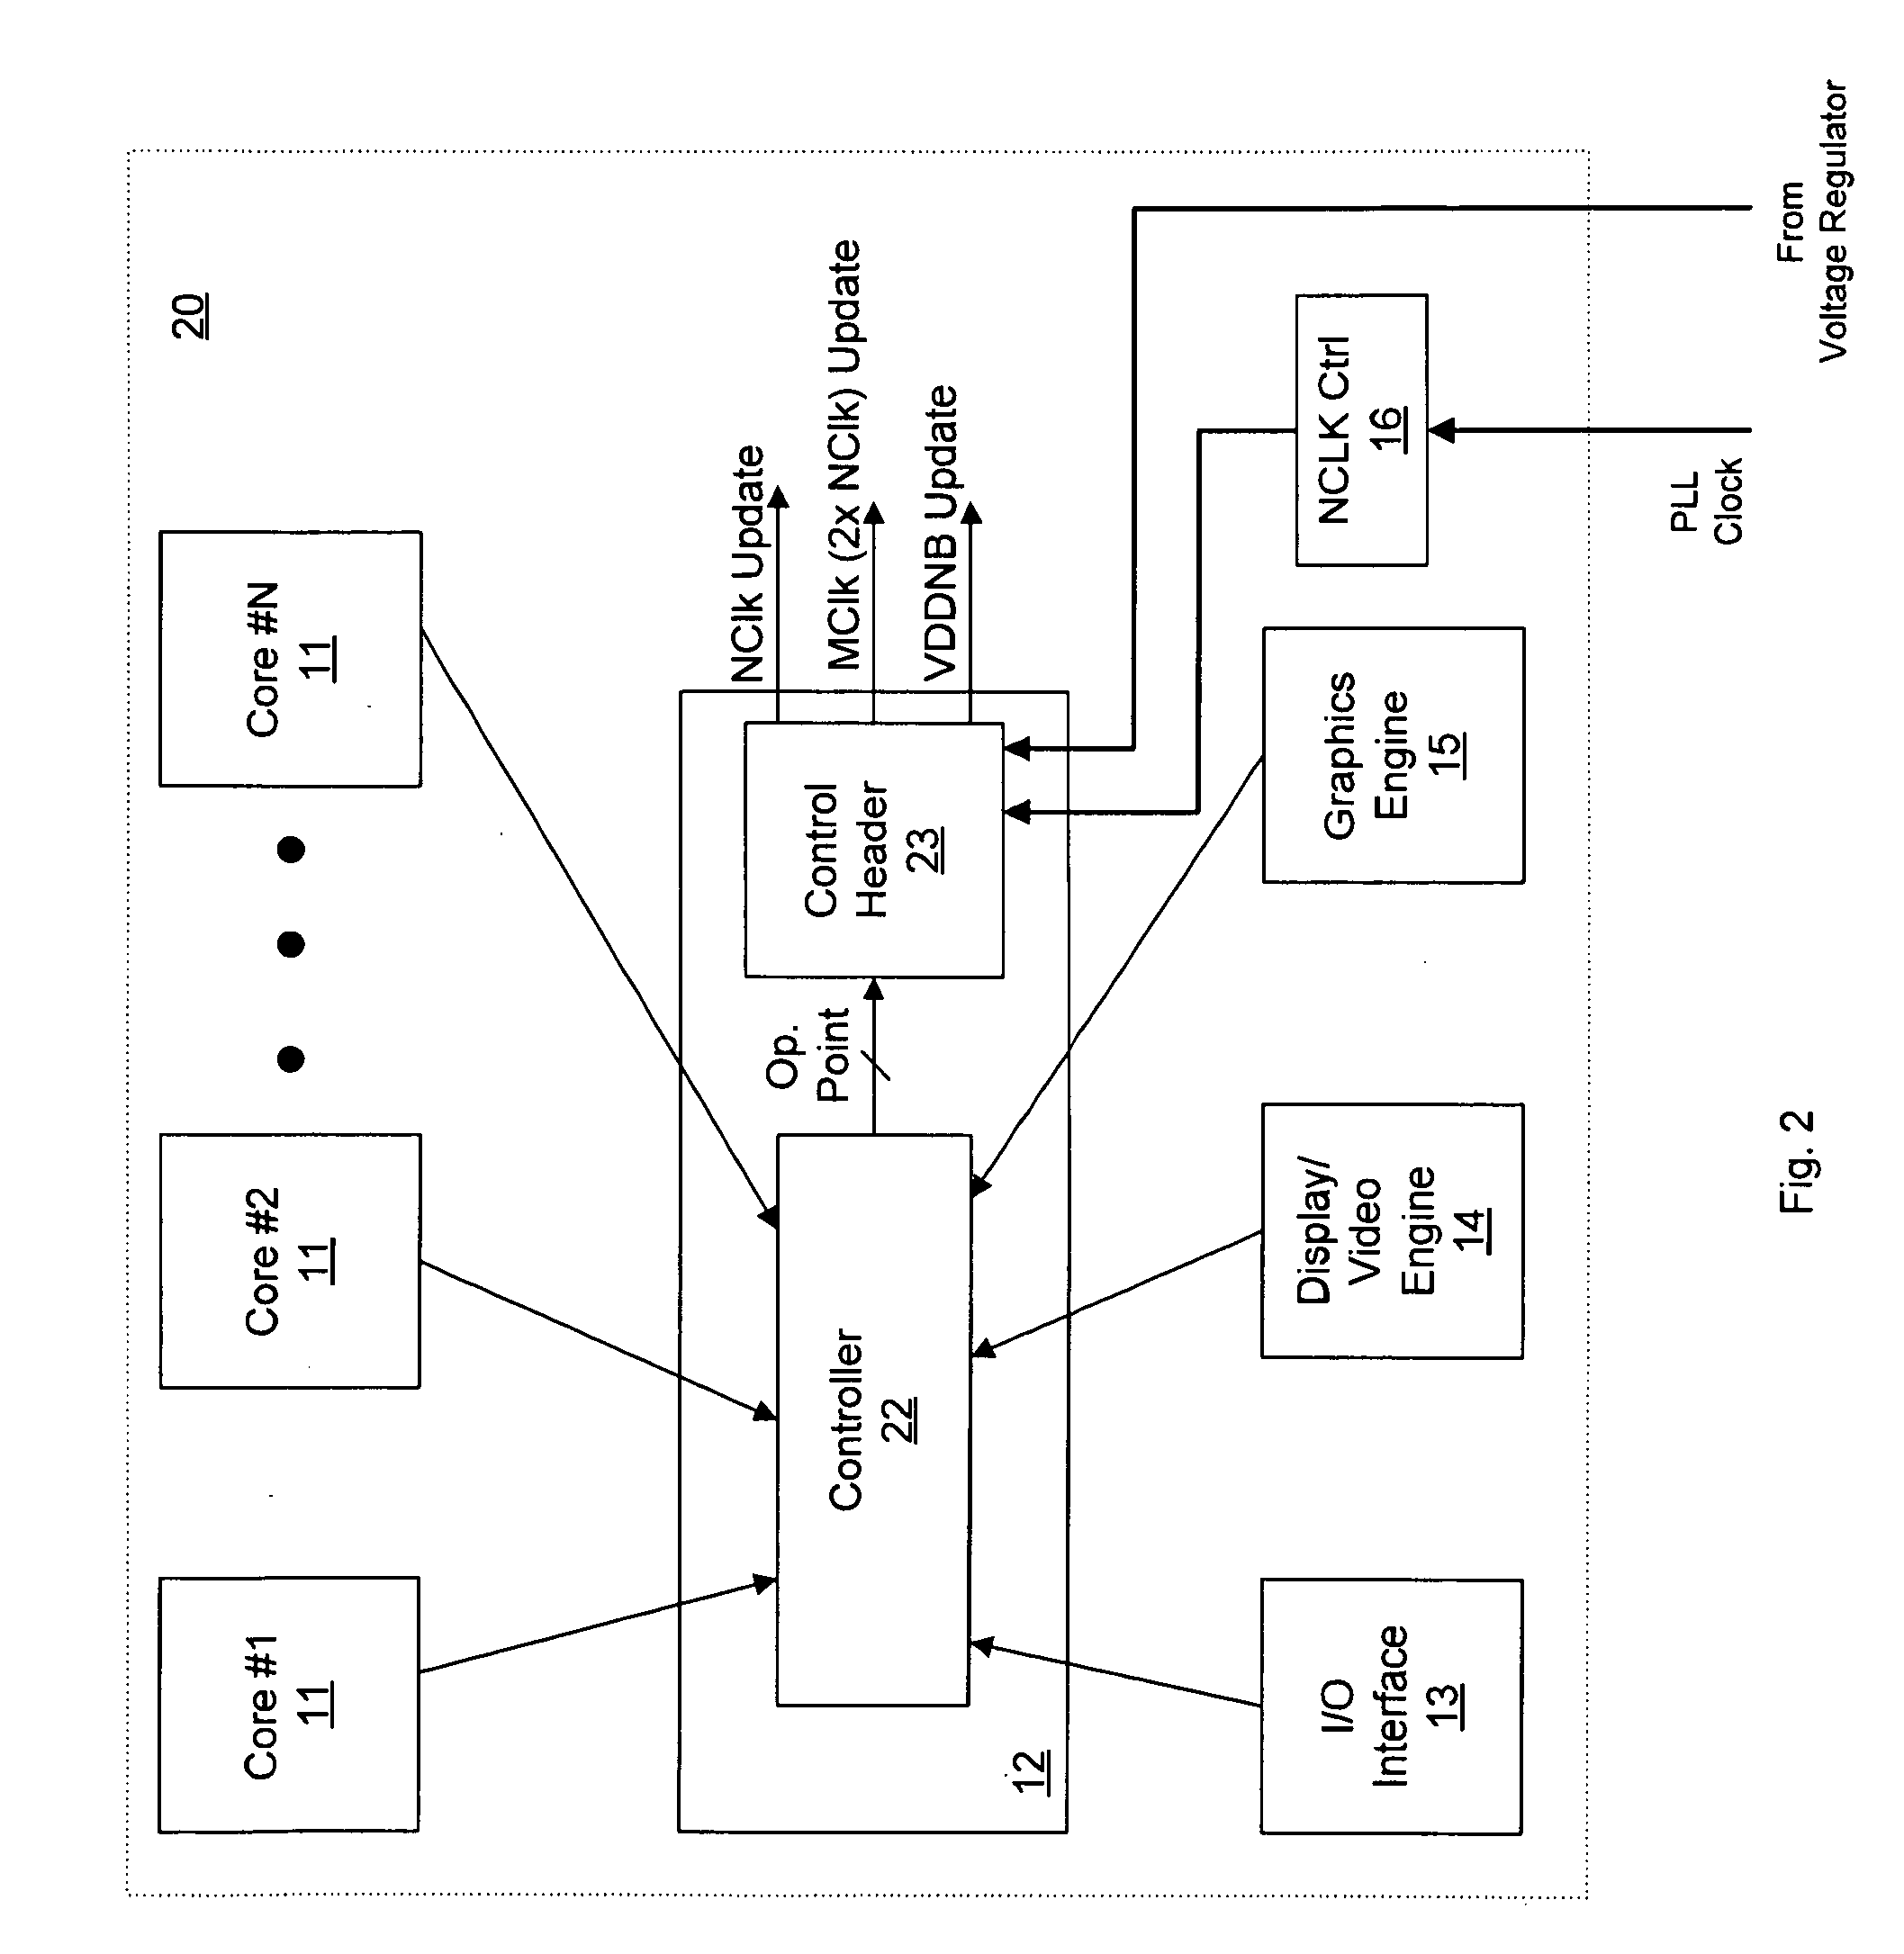 Optimization of application power consumption and performance in an integrated system on a chip